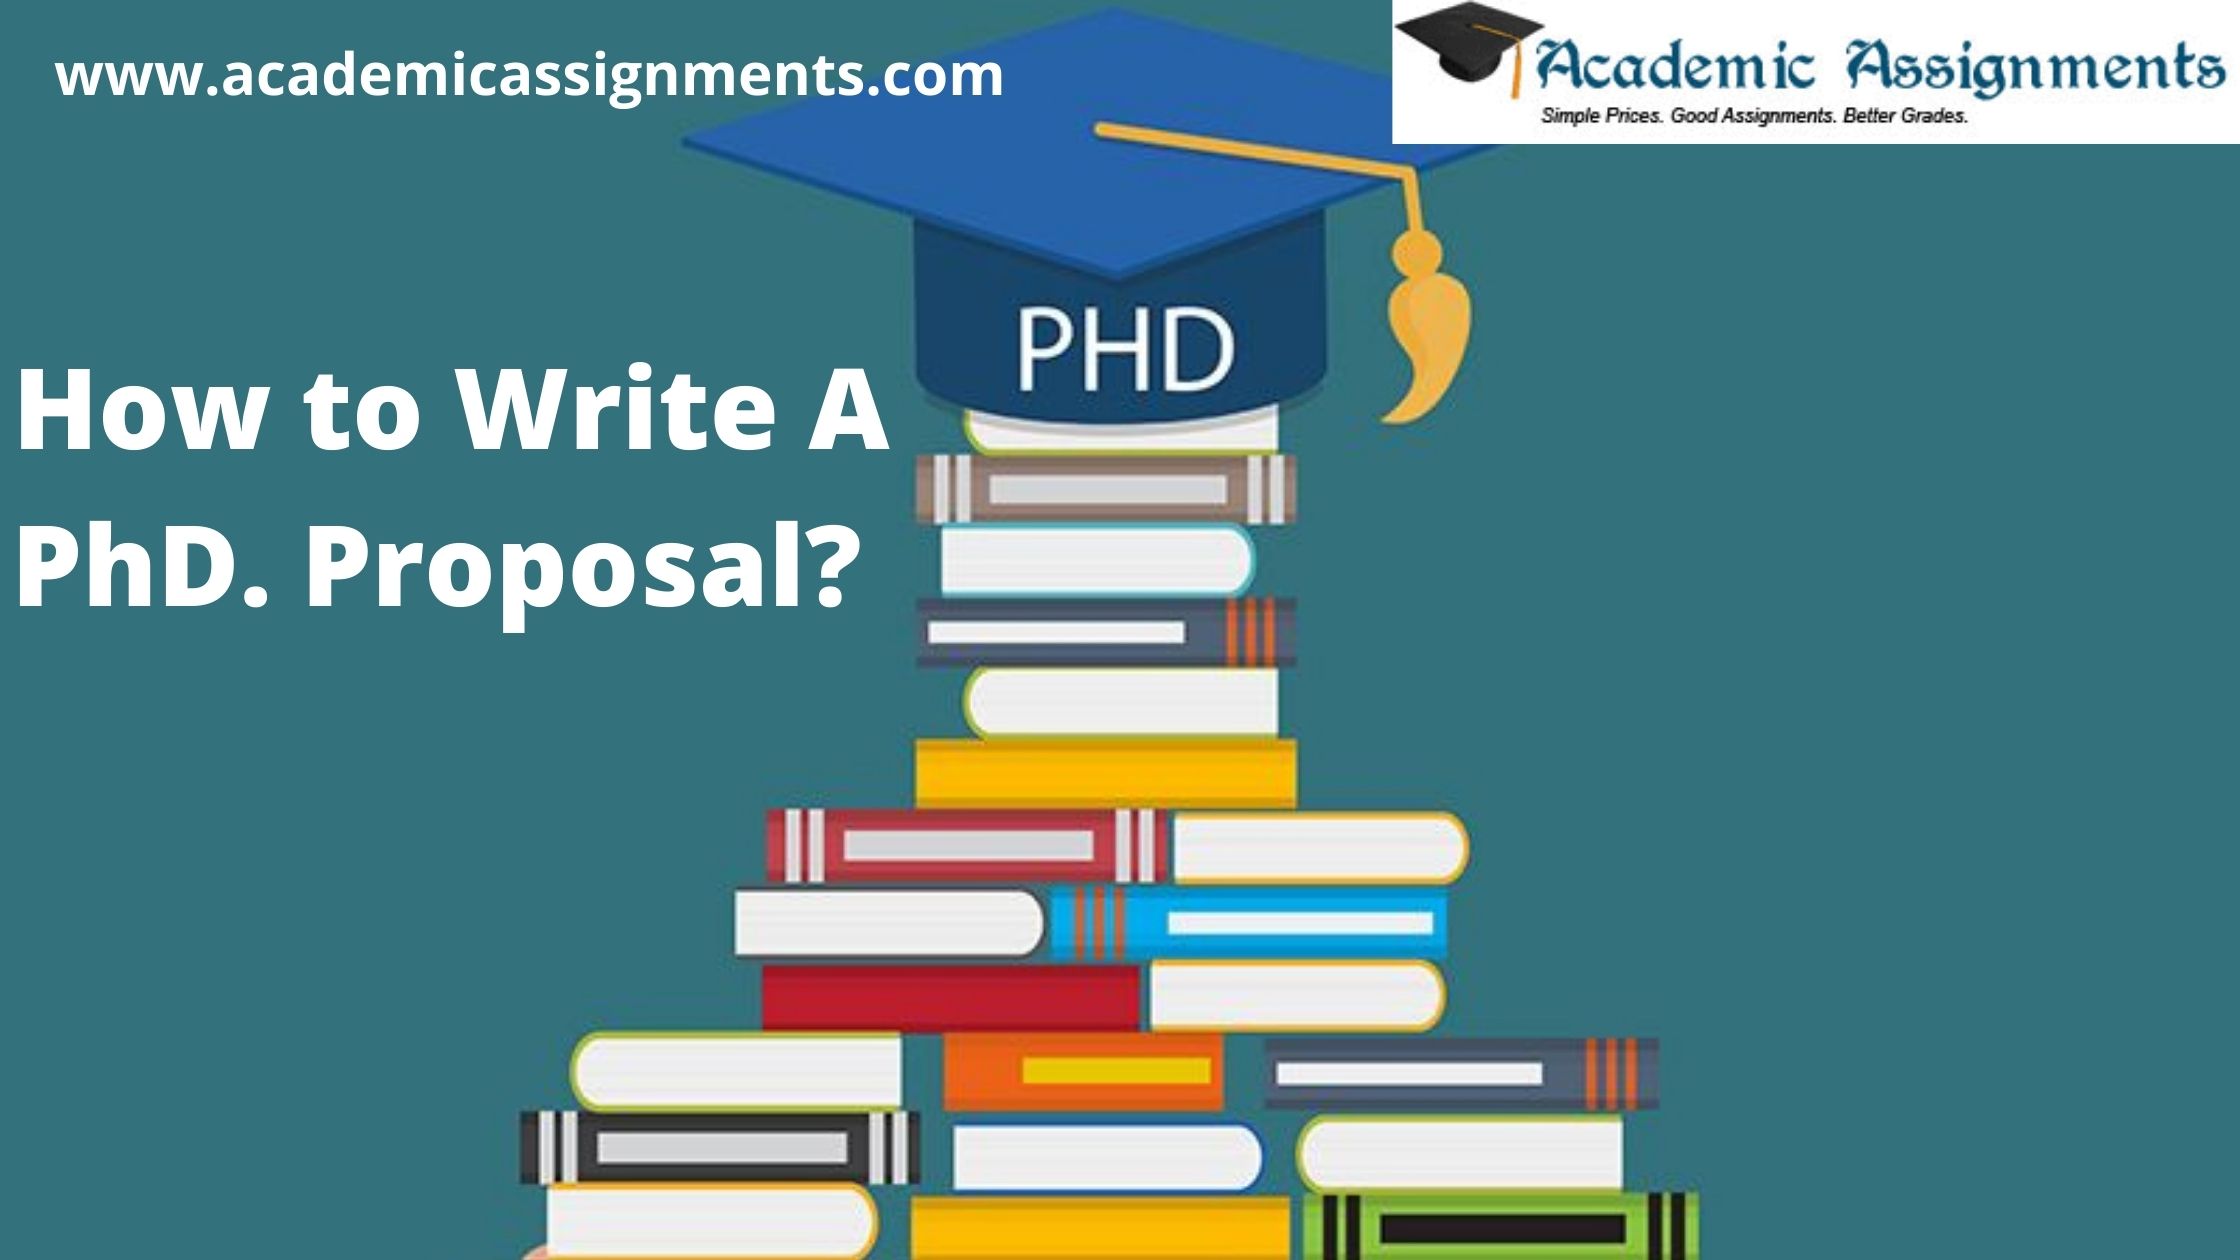 how to write a PhD proposal